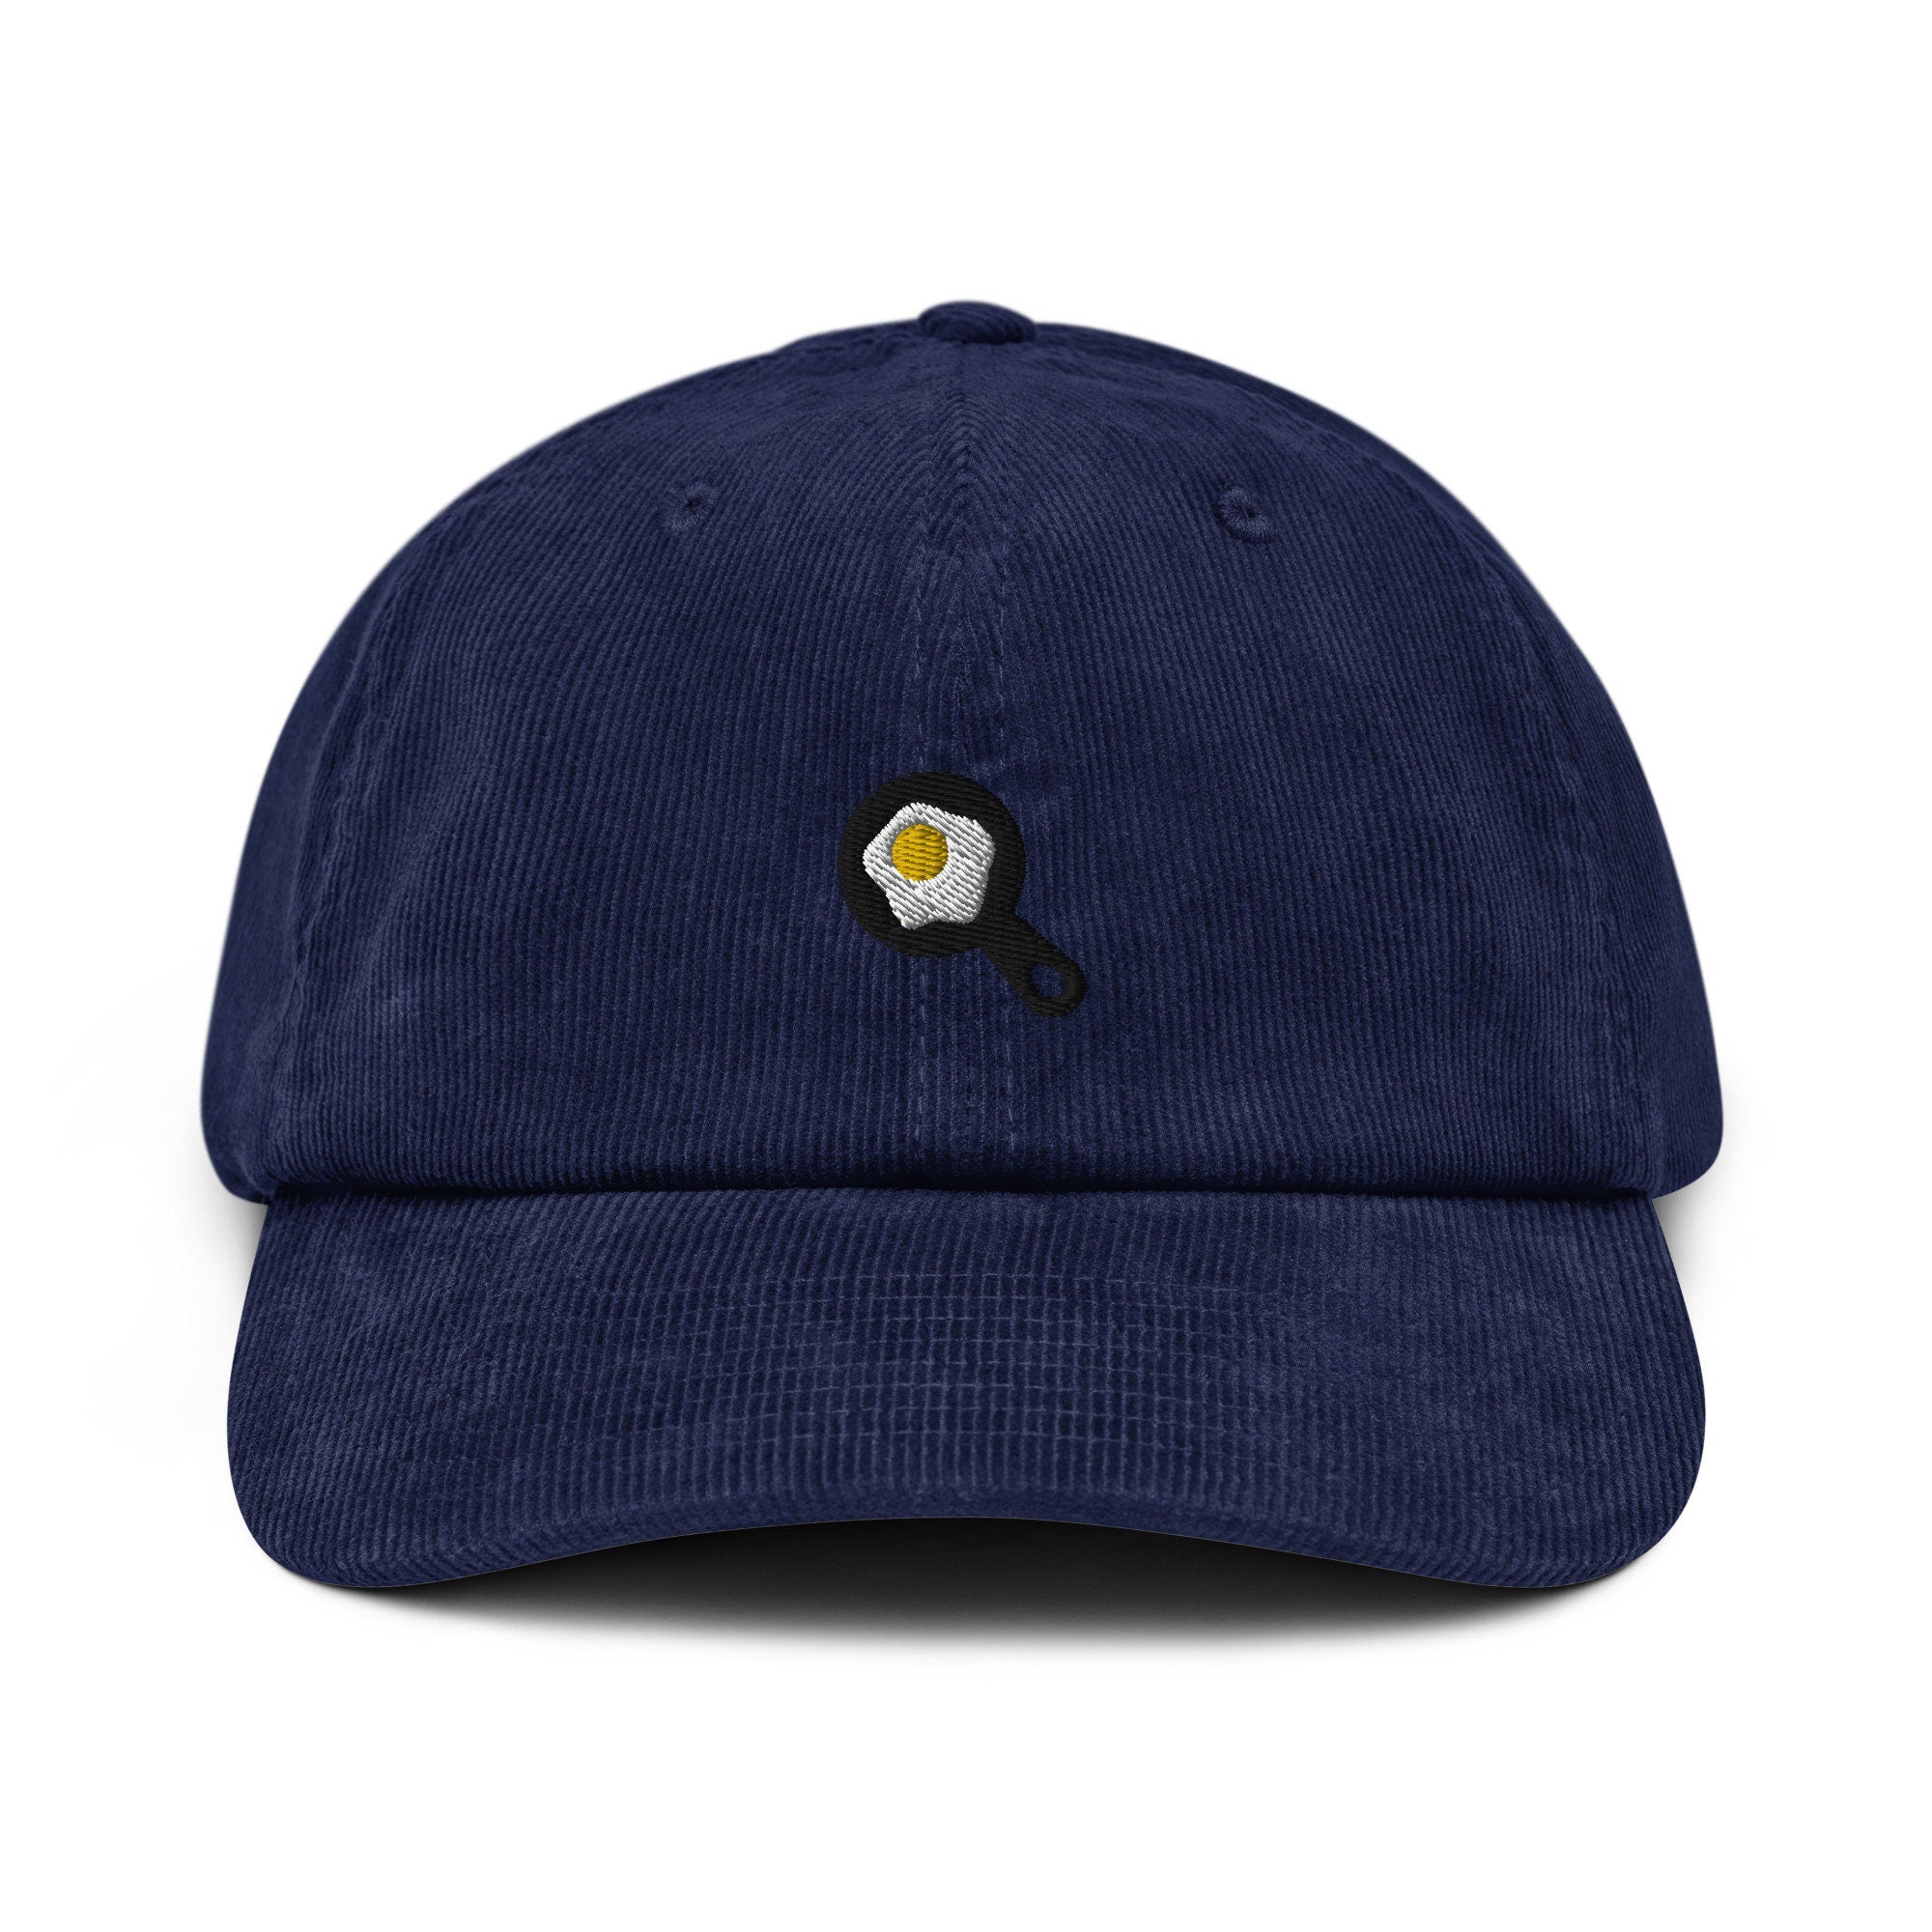 Fried Egg Corduroy Hat, Handmade Embroidered Corduroy Dad Cap - Multiple Colors